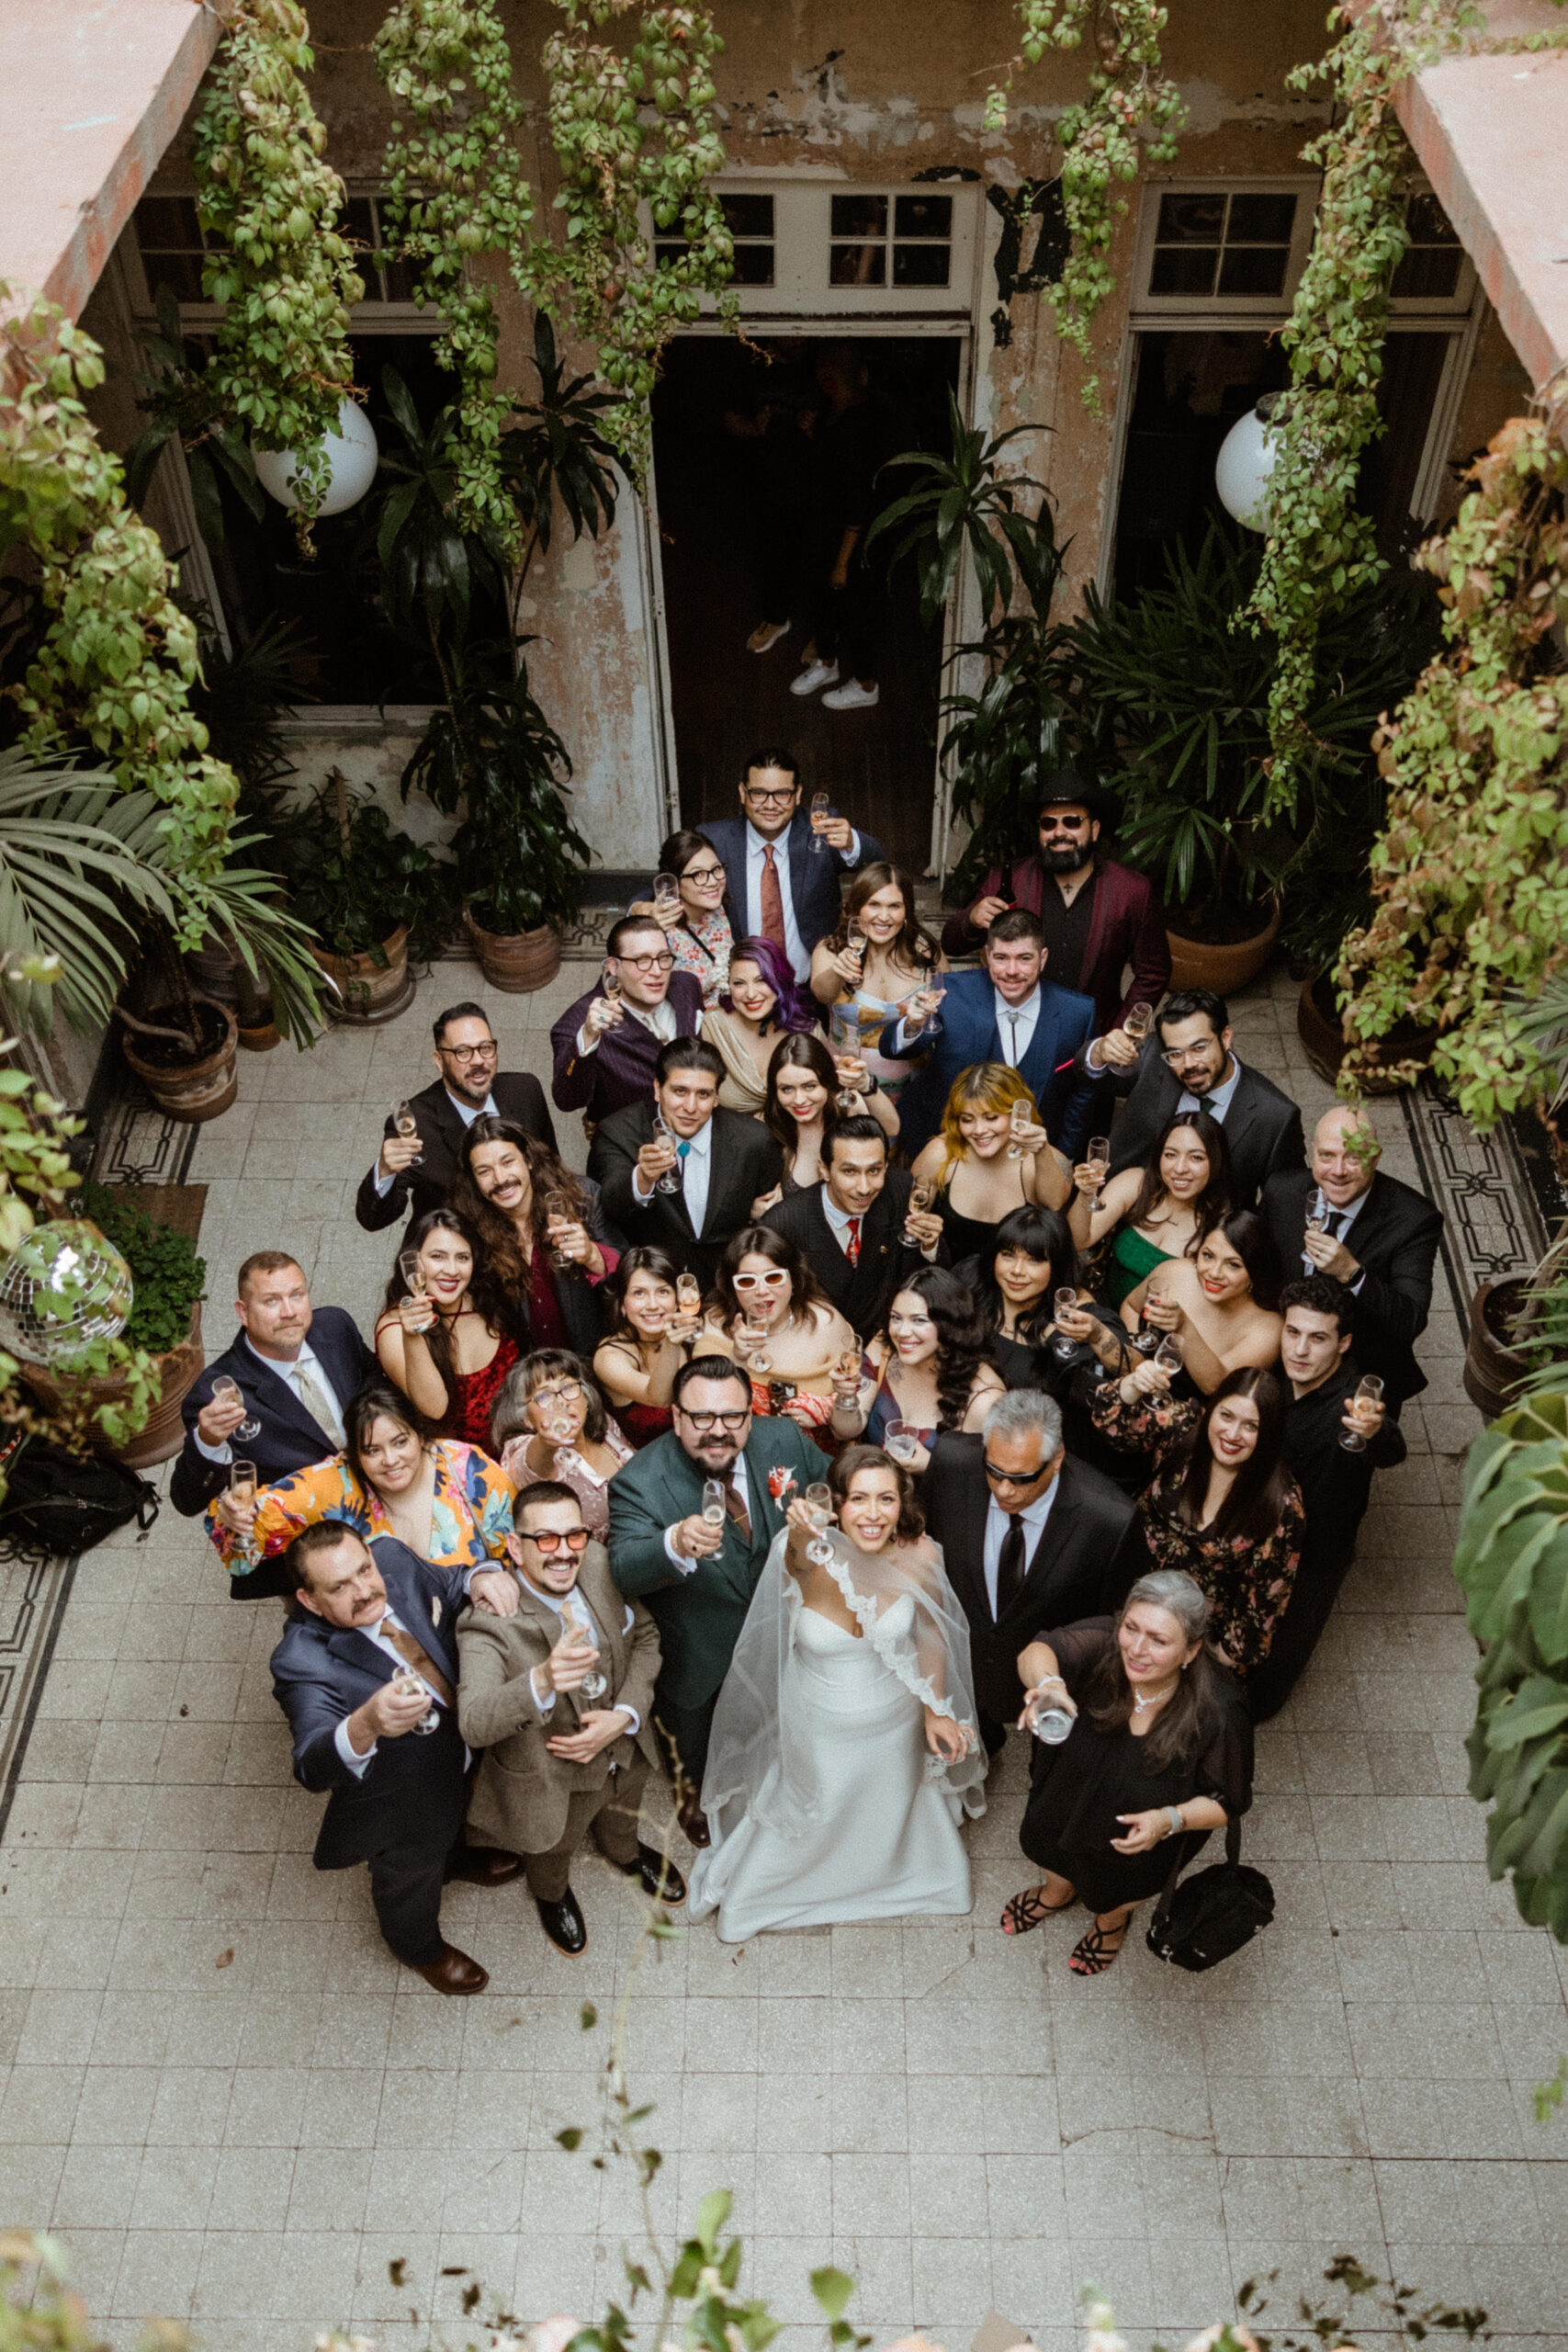 The whole wedding party poses together inside Sobremesa Mexico wedding venue